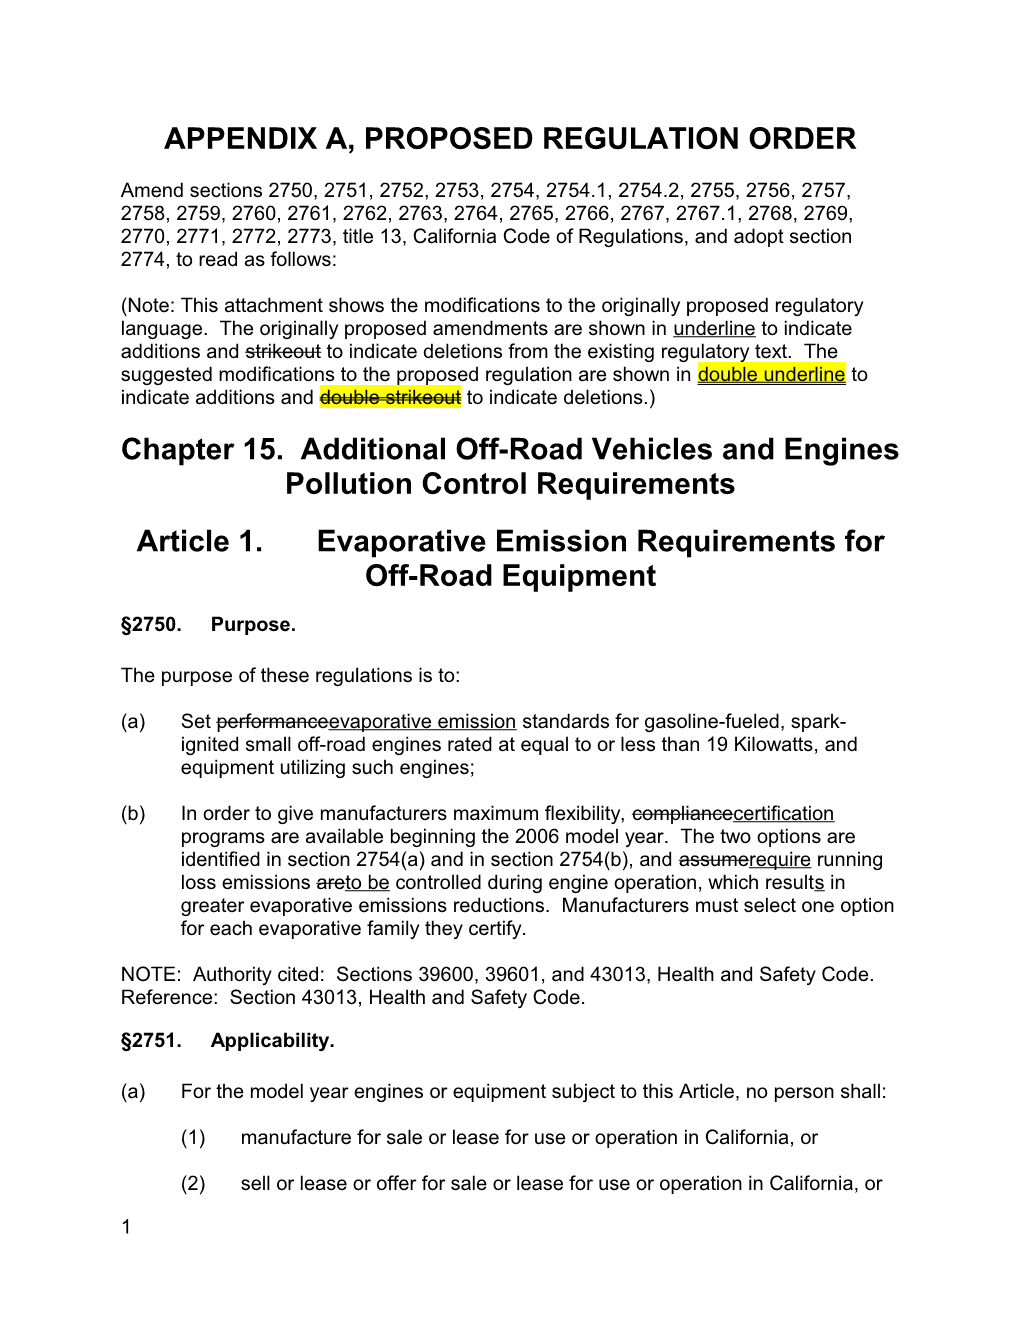 Notice Package for Small Off-Road Engines (SORE) Regulation